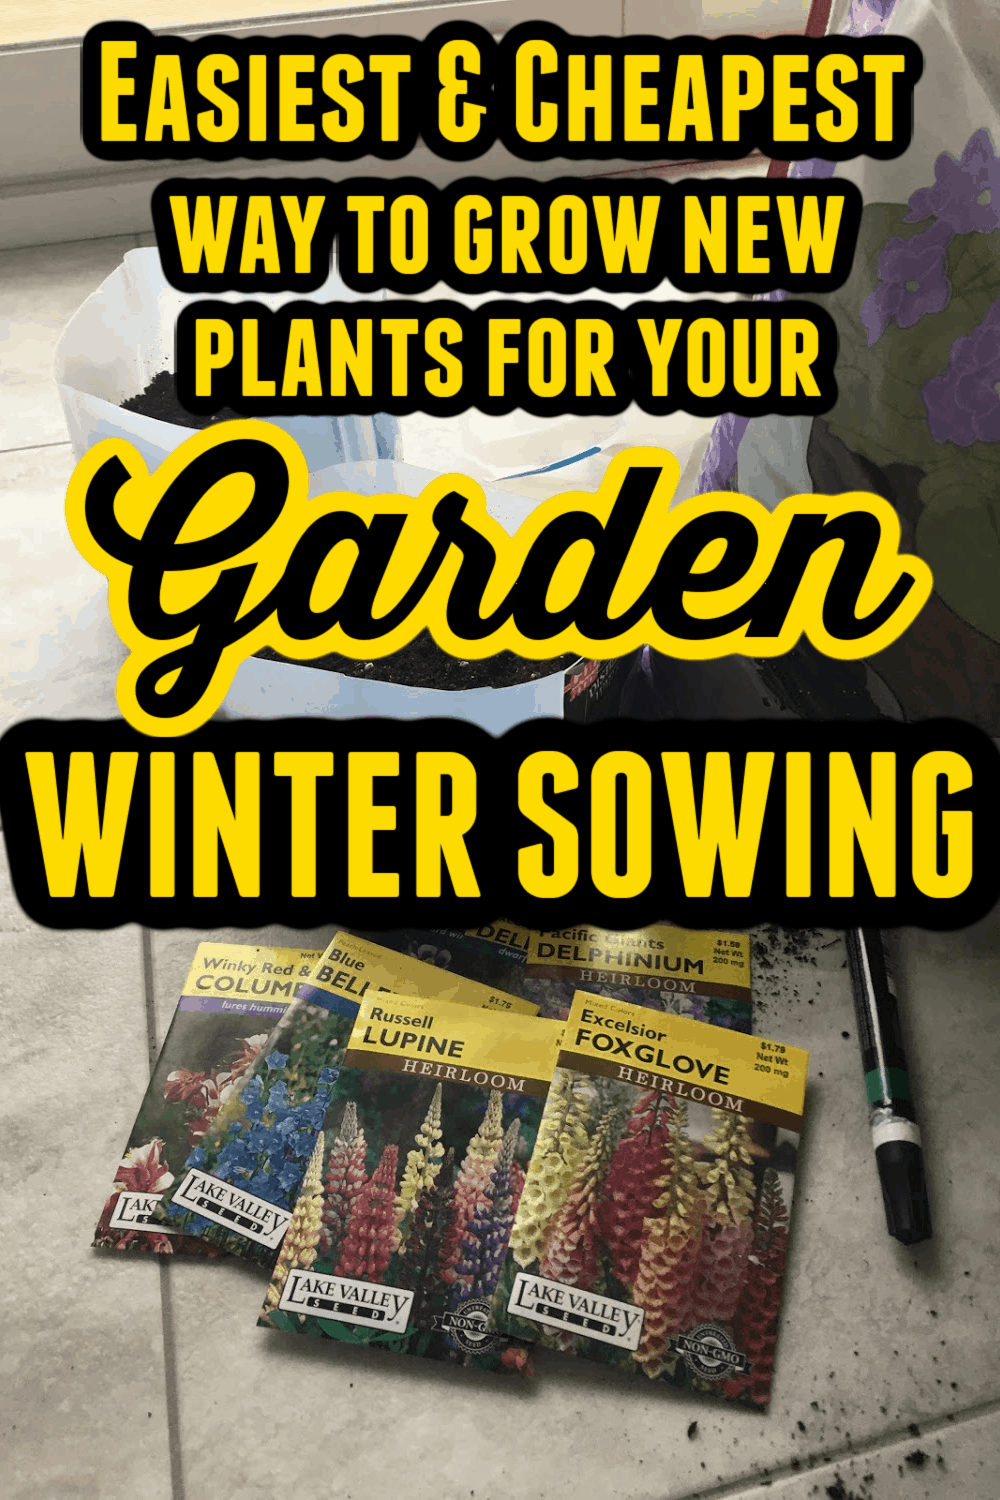 Image of Garden Seeds with Text Overlay - Easiest & Cheapest way to grow new plants for your Garden Winter Sowing